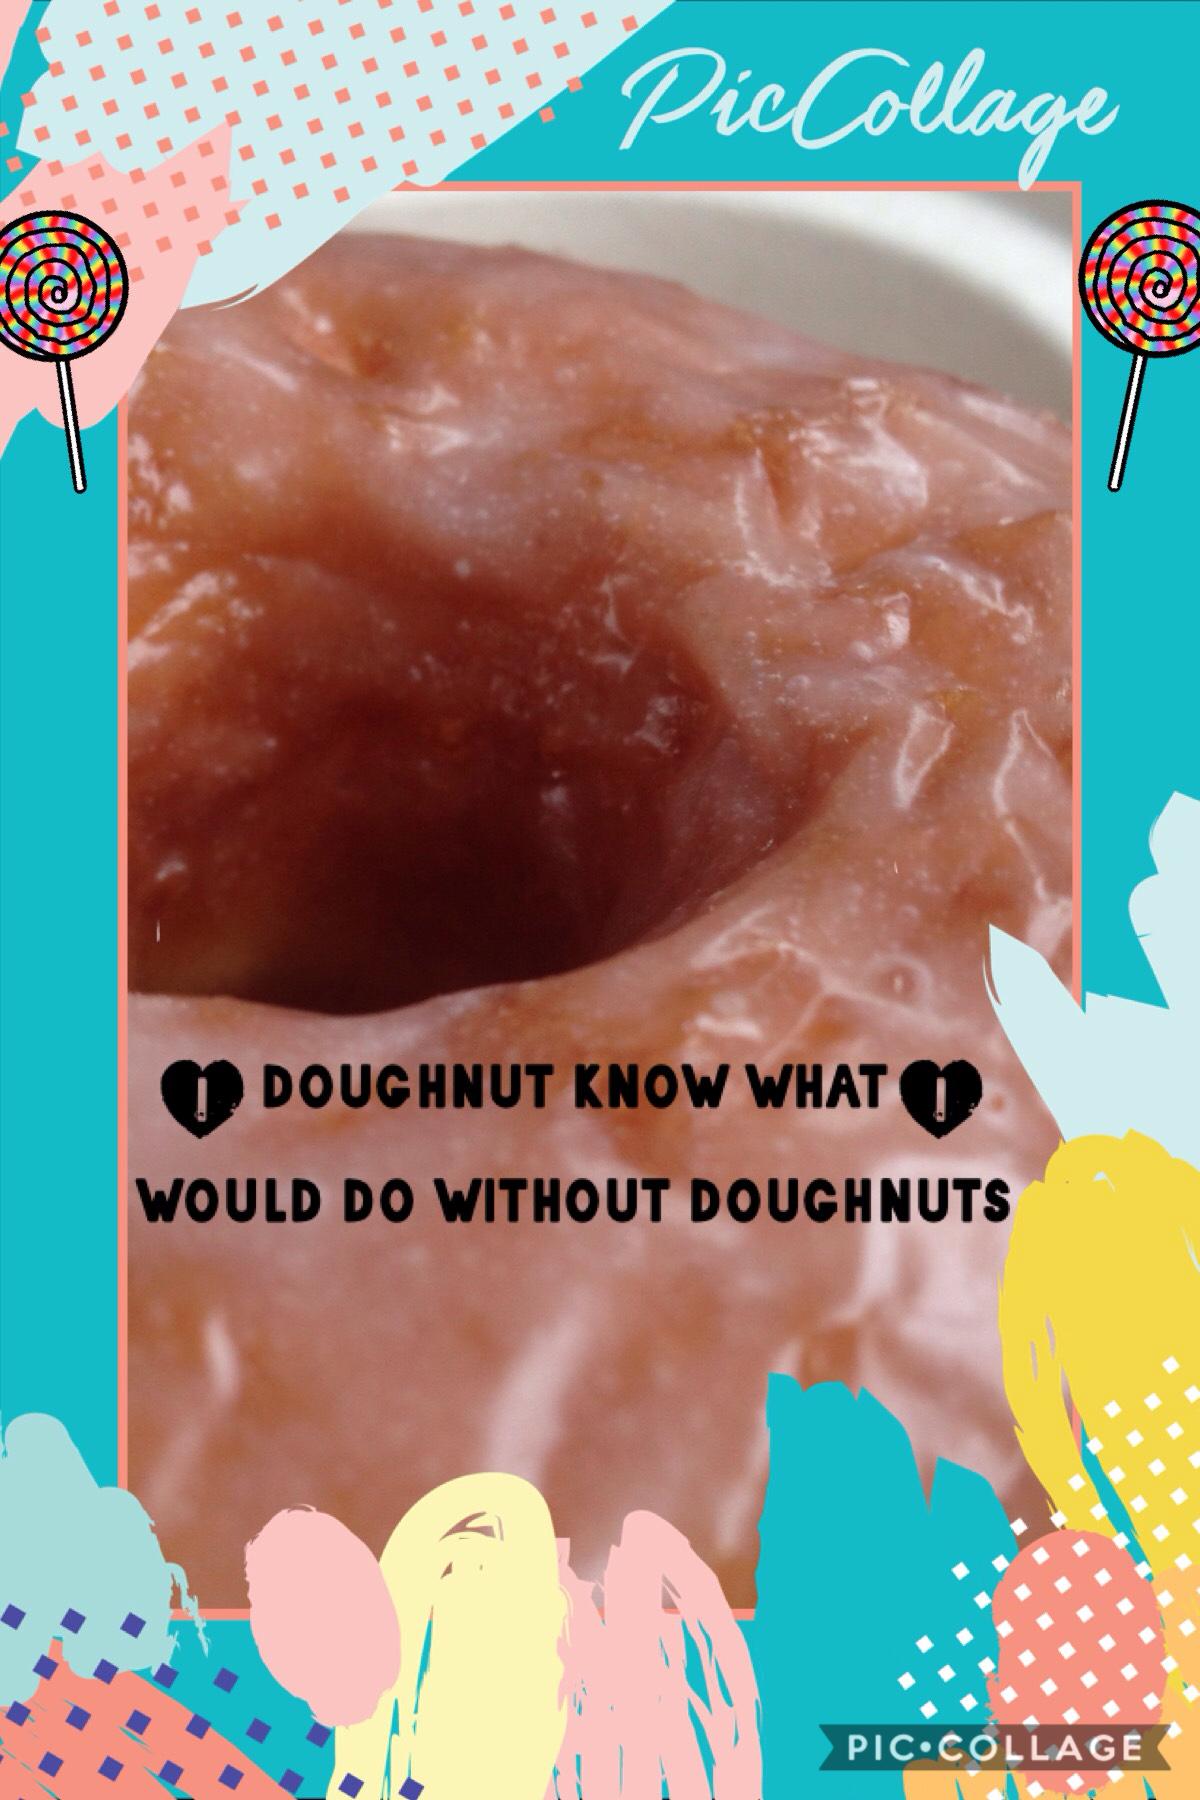 #desserts 
 Like this post if you like doughnuts and
Follow me NOW if you love sugar and sweets!!!🍩🍩🍩